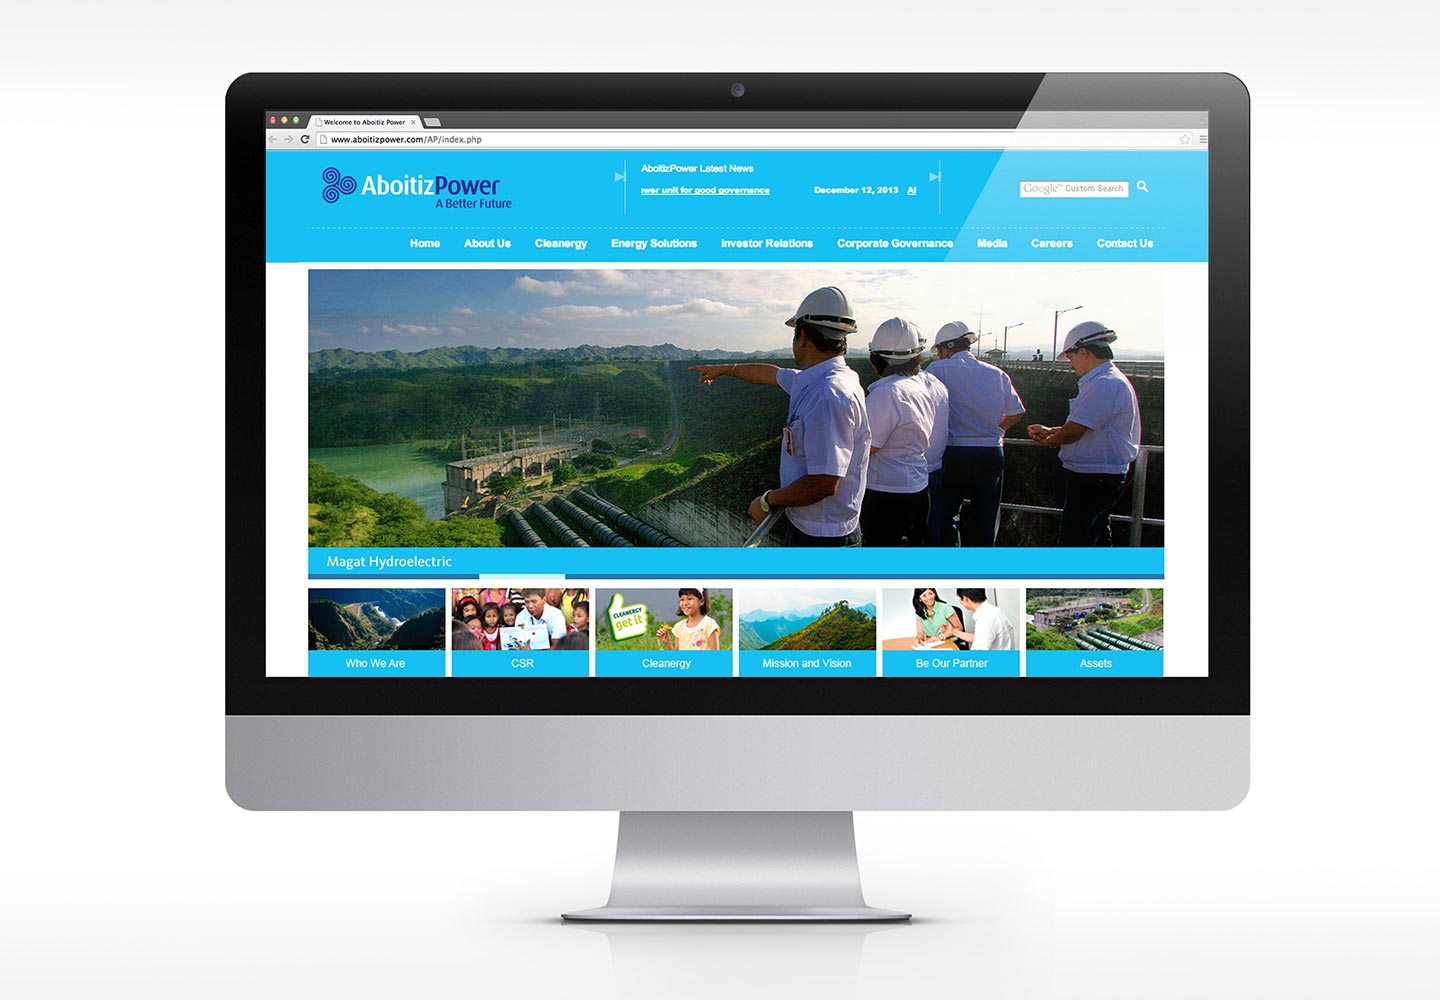 Brand Consultancy in Energy Industry. Website design for AboitizPower.